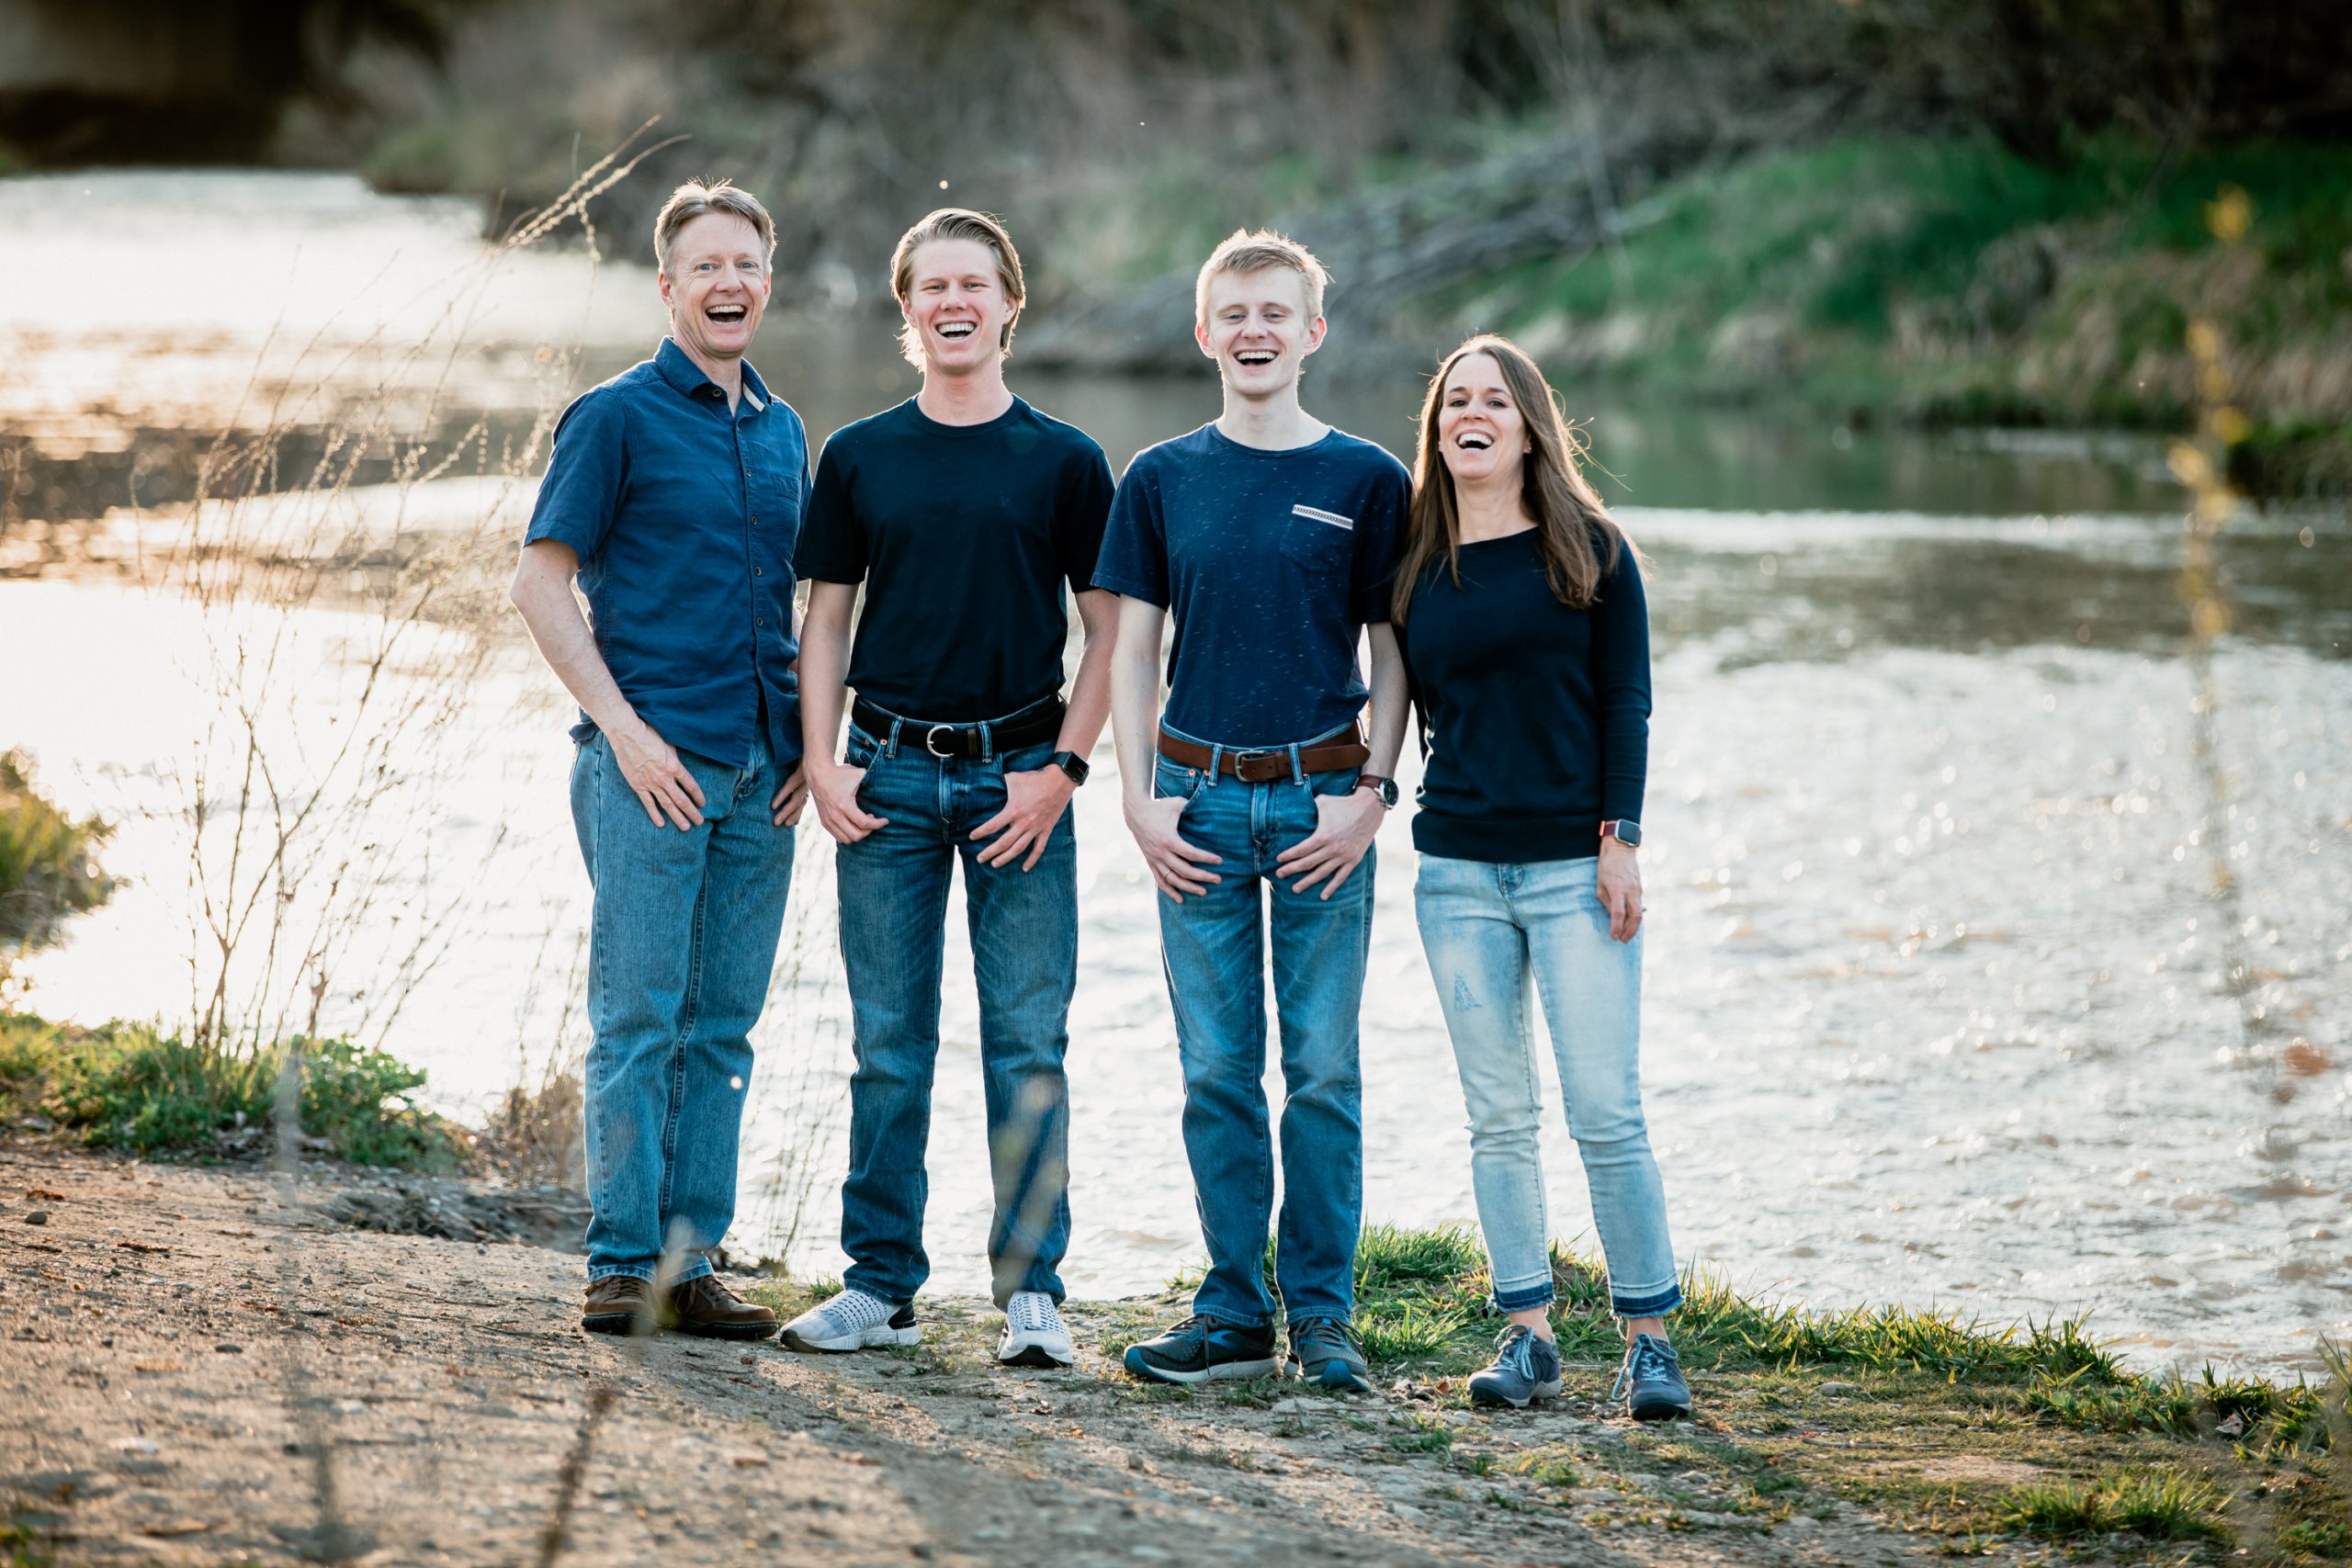 longmont family with teens standing by river during photography session